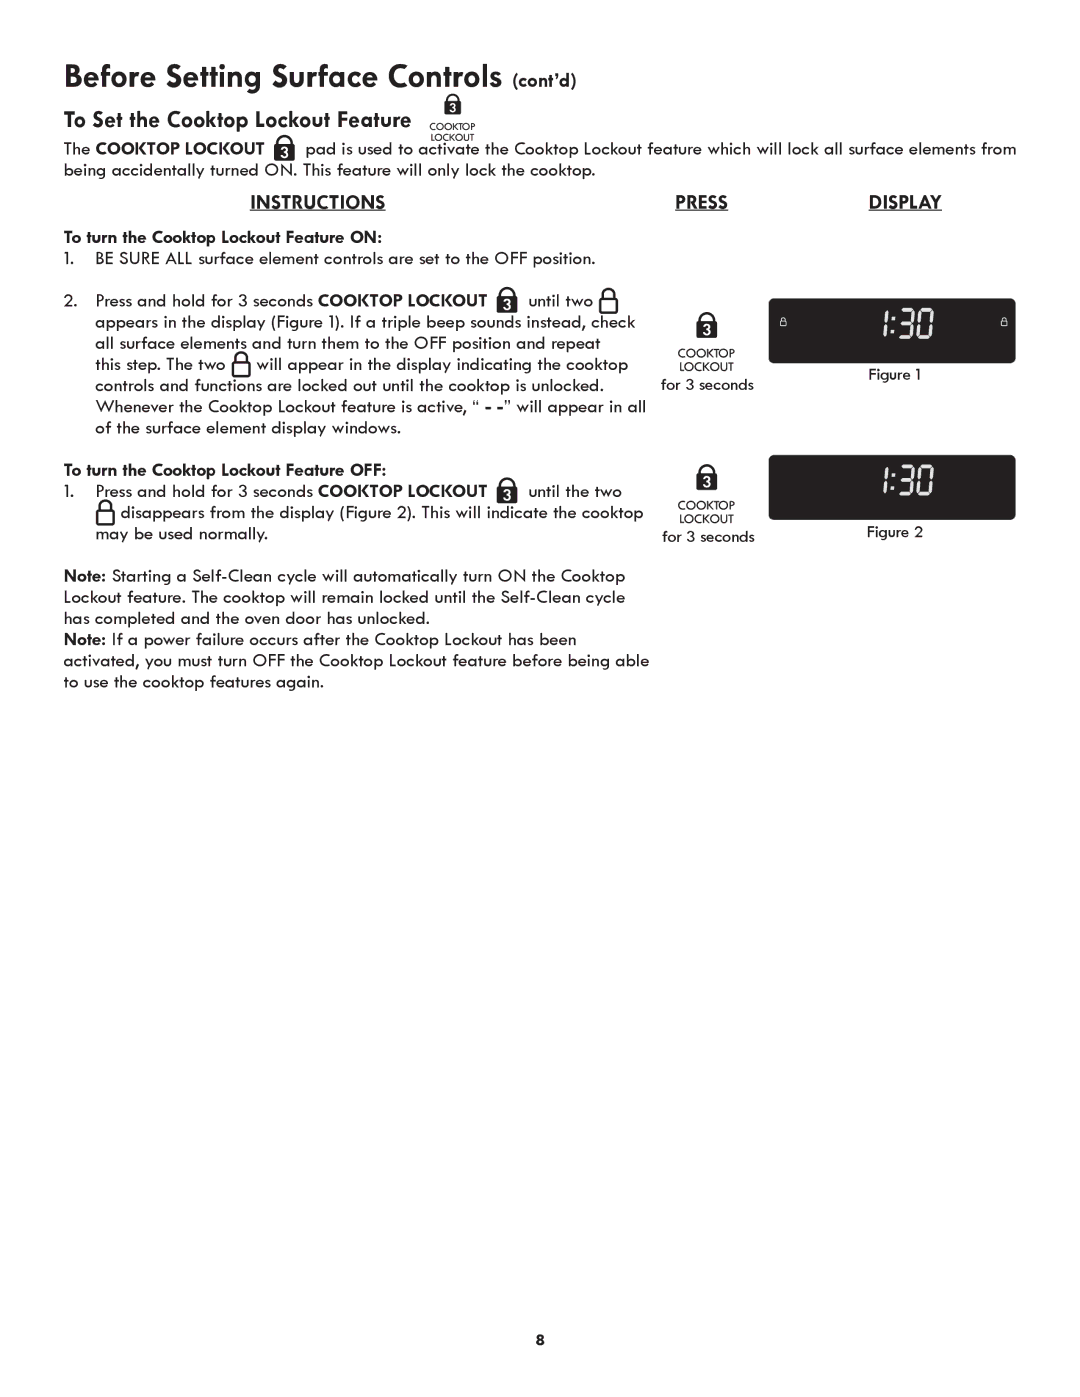 Kenmore 790.9751 manual Before Setting Surface Controls cont’d, To Set the Cooktop Lockout Feature, Instructions, Display 